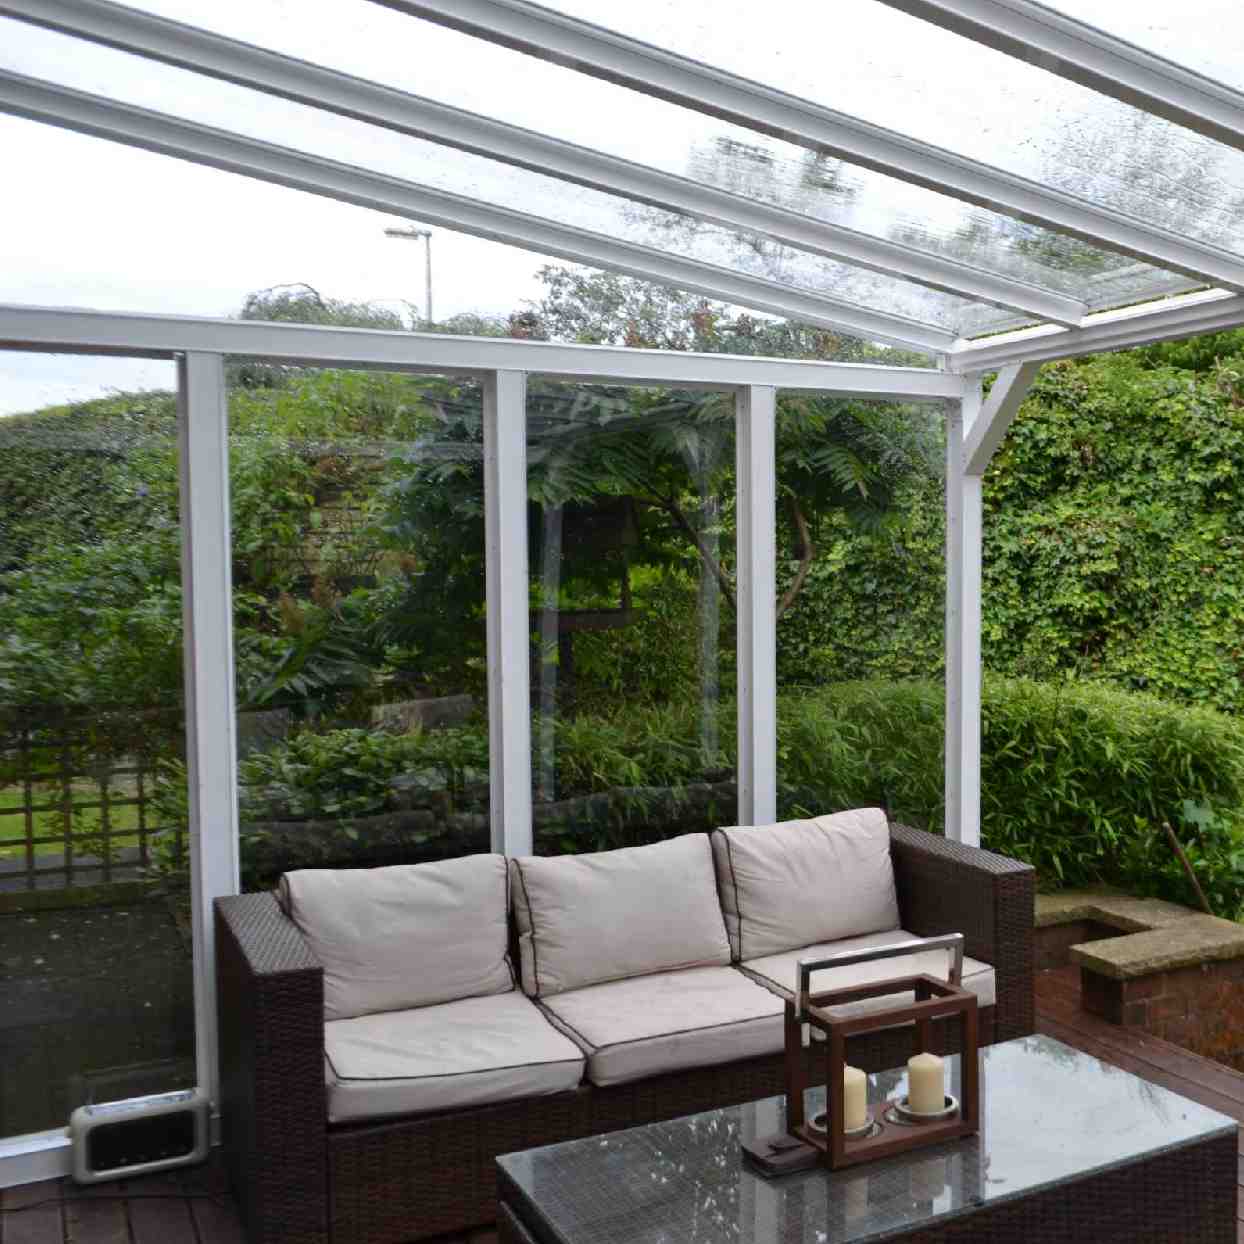 Buy Omega Verandah White with 16mm Polycarbonate Glazing - 2.1m (W) x 4.0m (P), (2) Supporting Posts online today